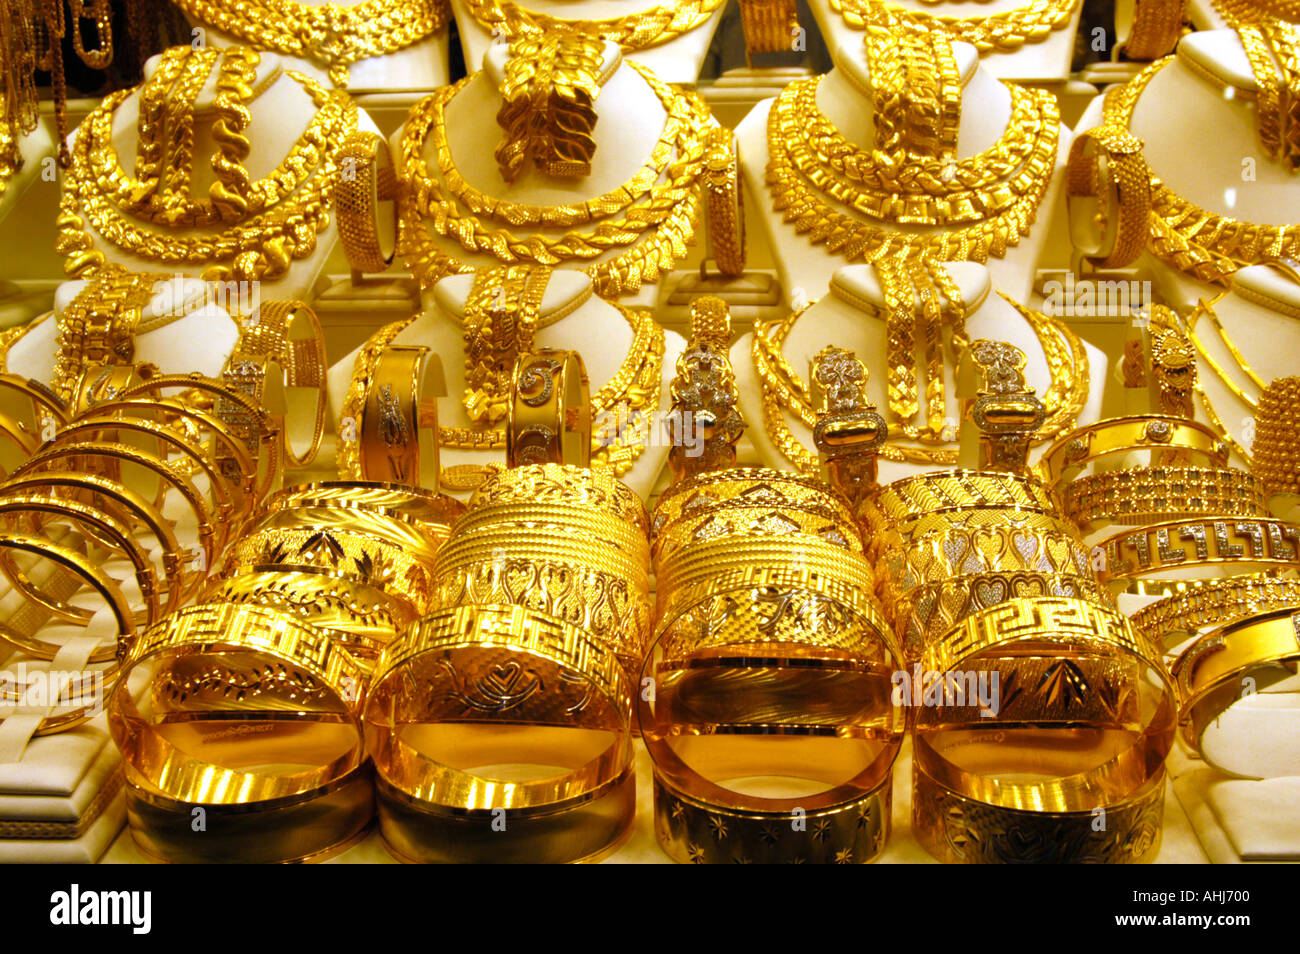 Gold Jewelry High Resolution Stock Photography and Images - Alamy